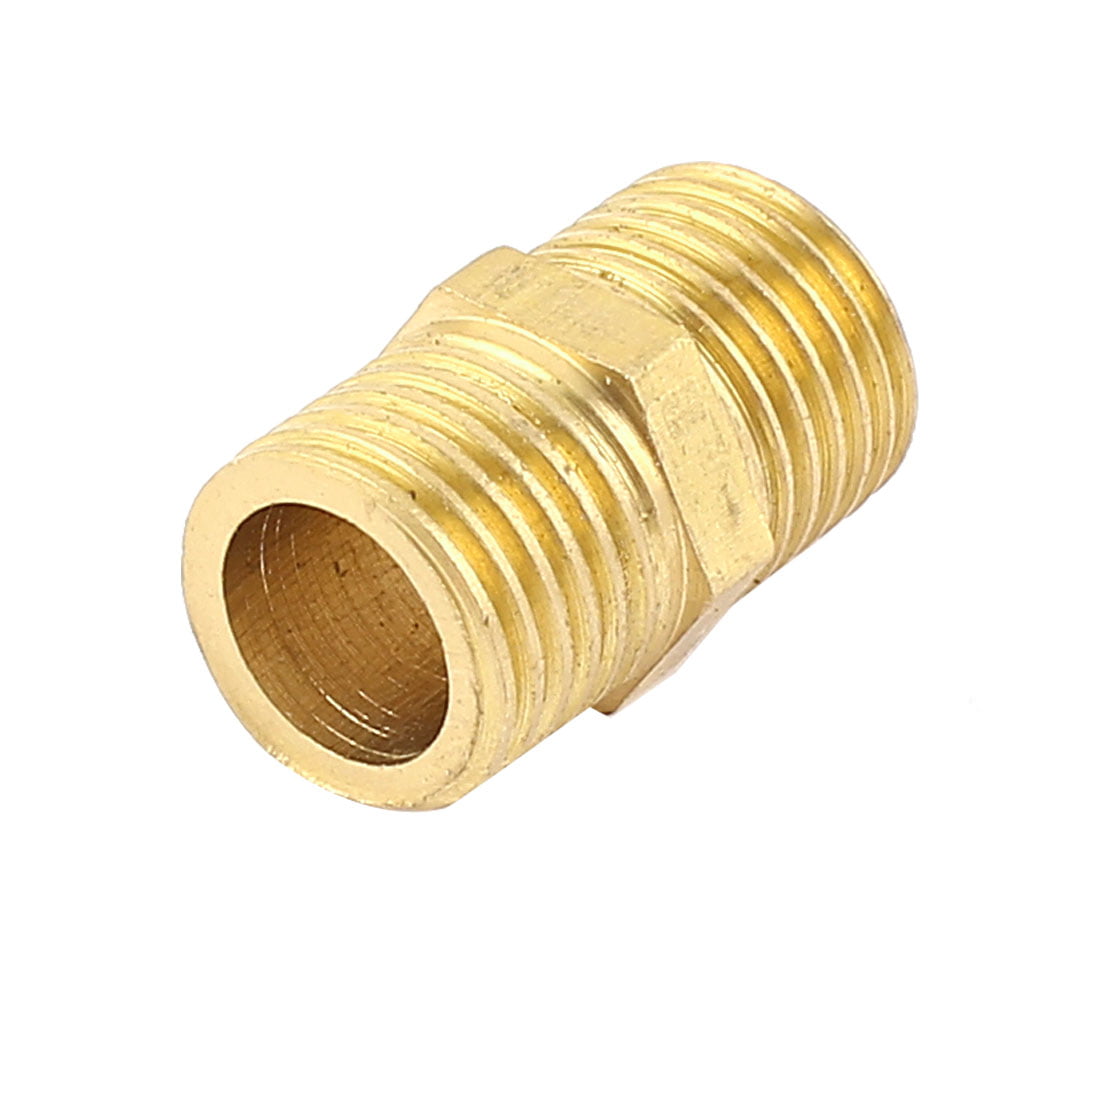 Brass Pneumatic Male Thread Hex Nipple Equal Union Reducing Connector Fitting 2 